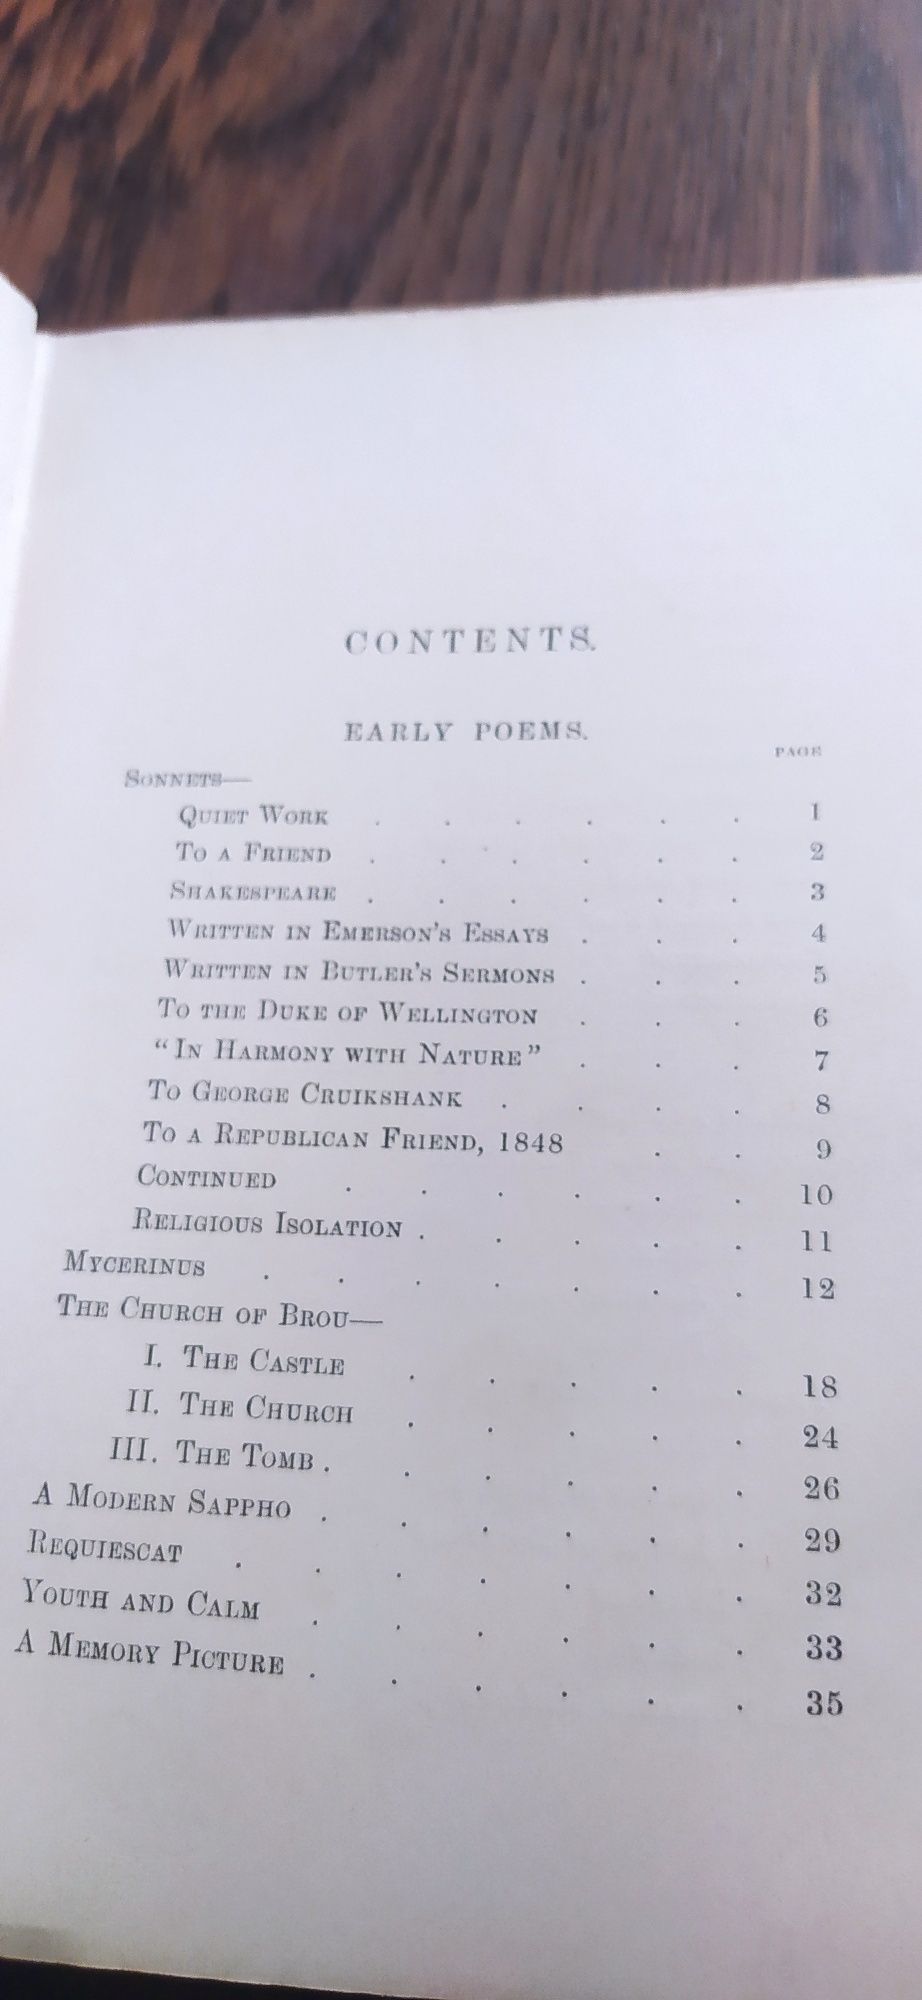 Early Poems, Narrative Poems, And Sonnets Matthew Arnold